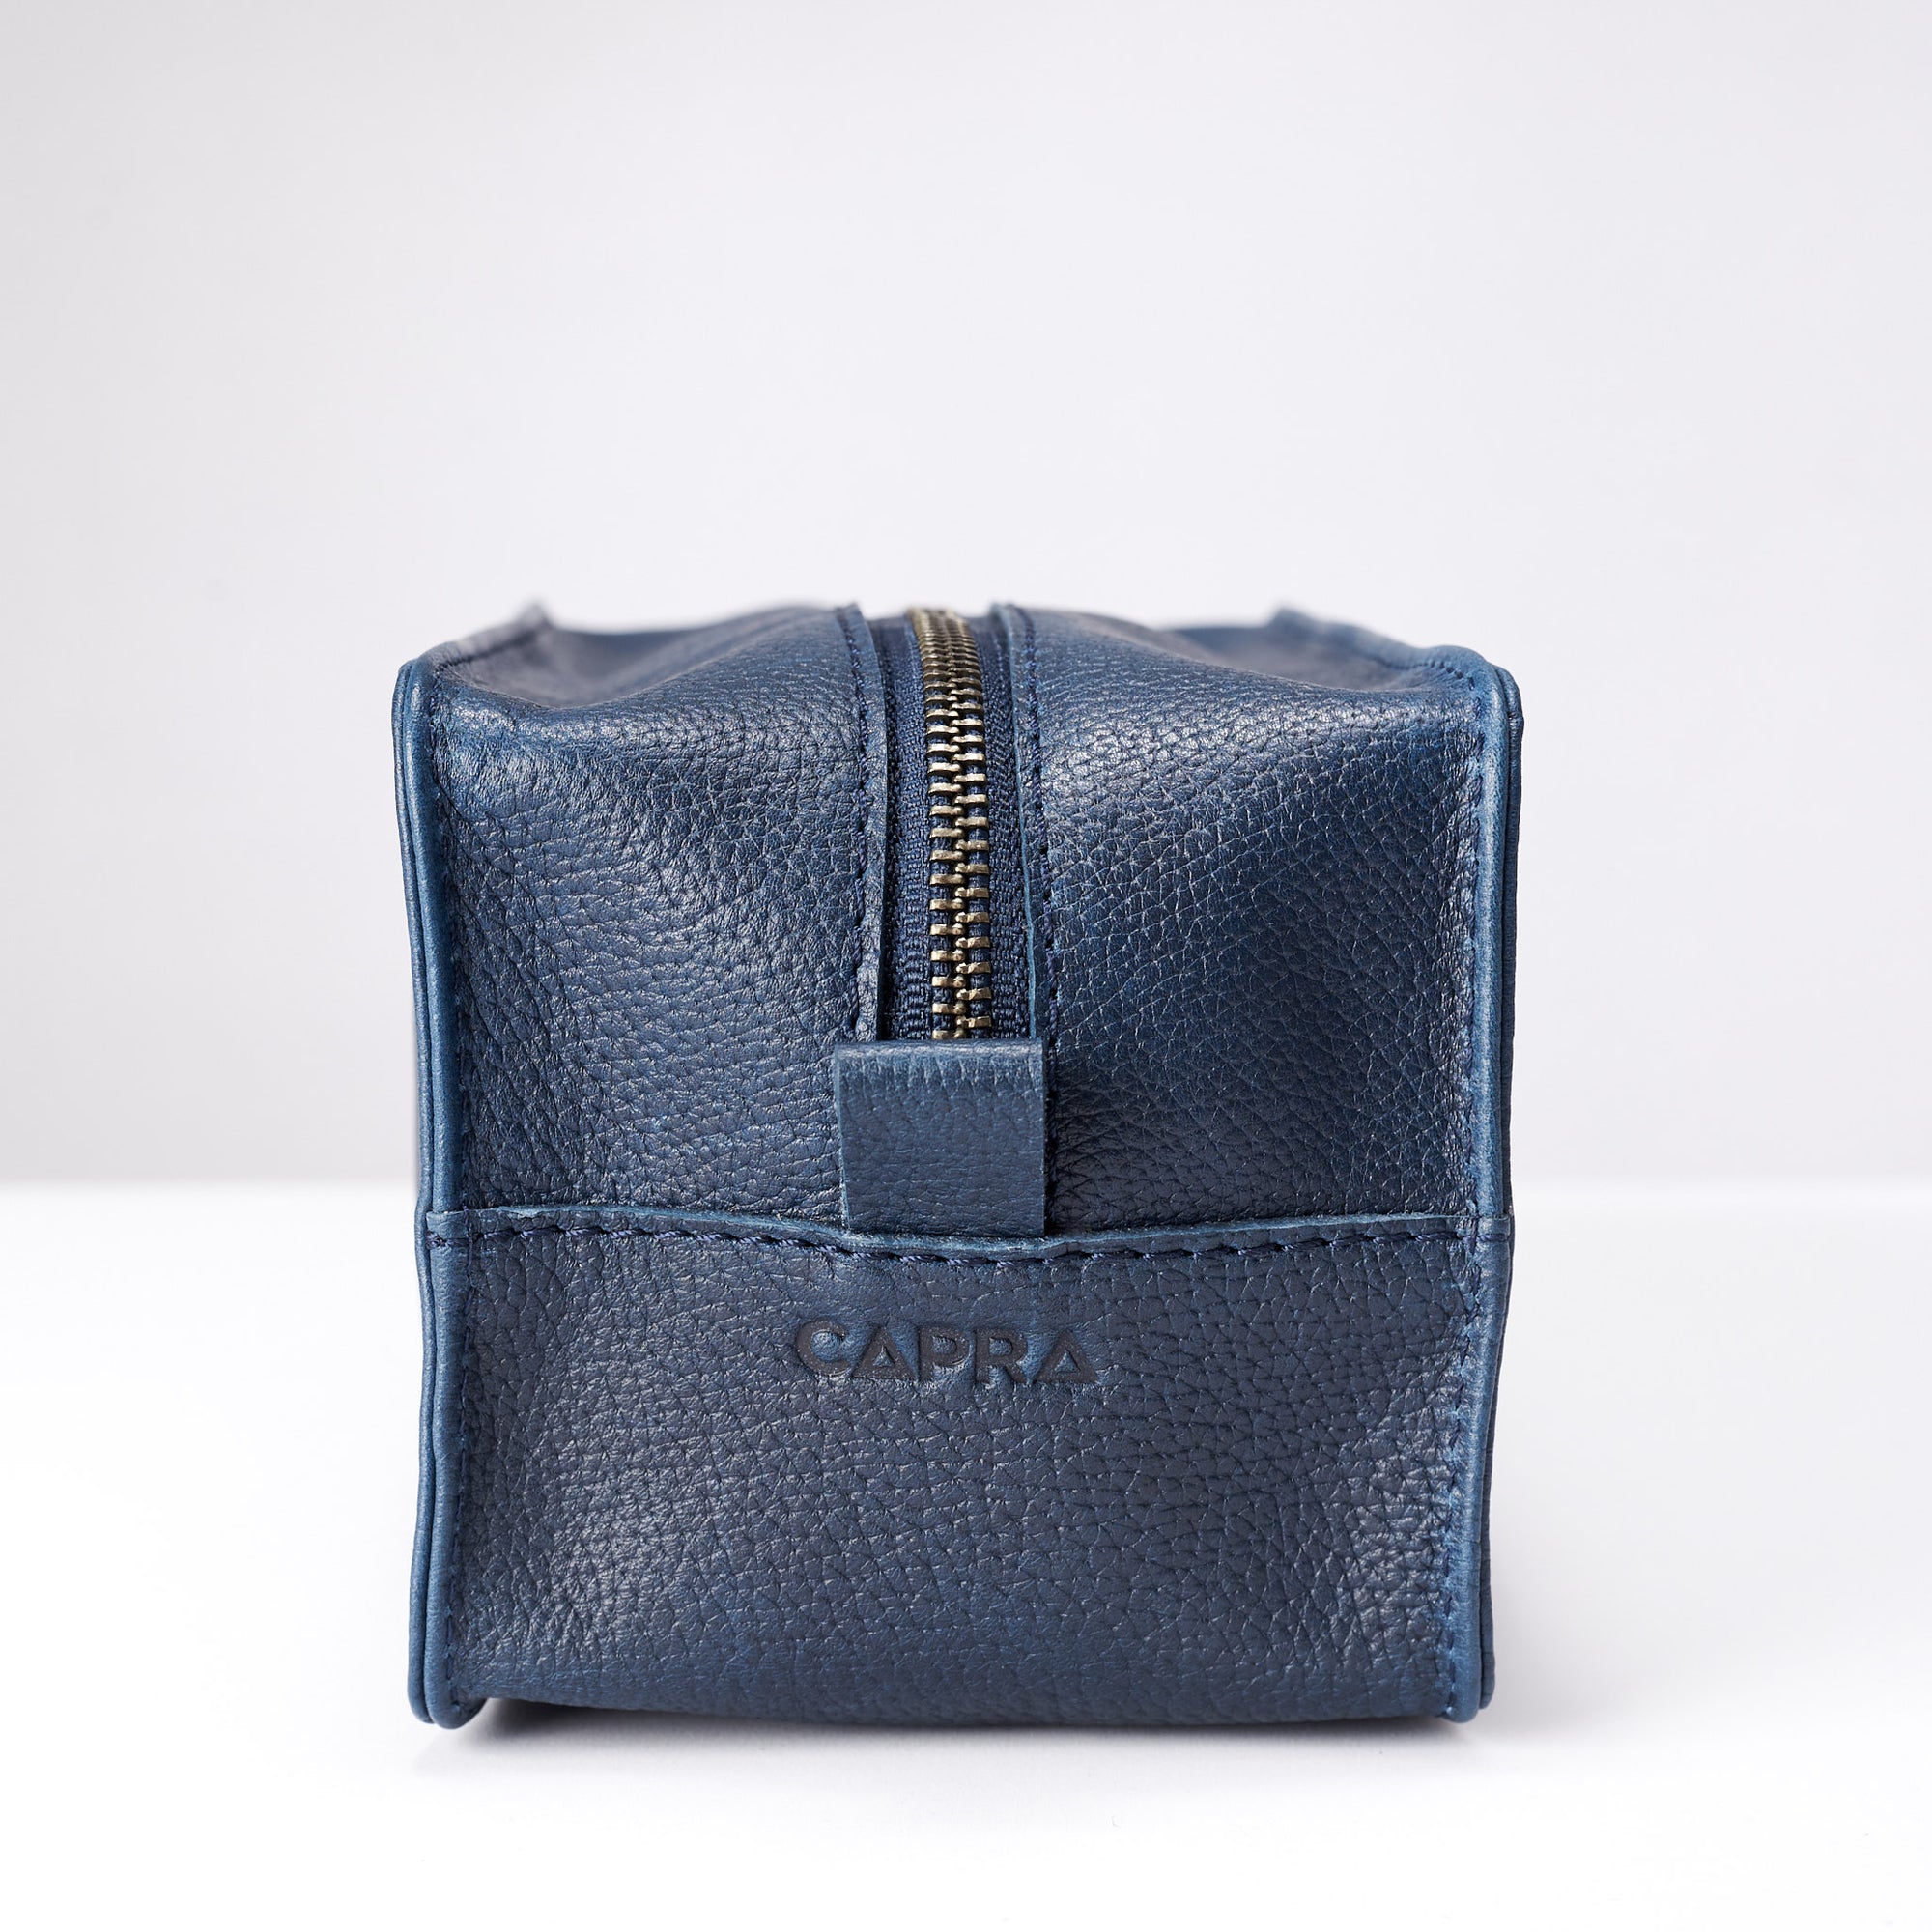 Zipper. Ocean blue leather toiletry, shaving bag with hand stitched handle. Groomsmen gifts. Leather good crafted by Capra Leather 